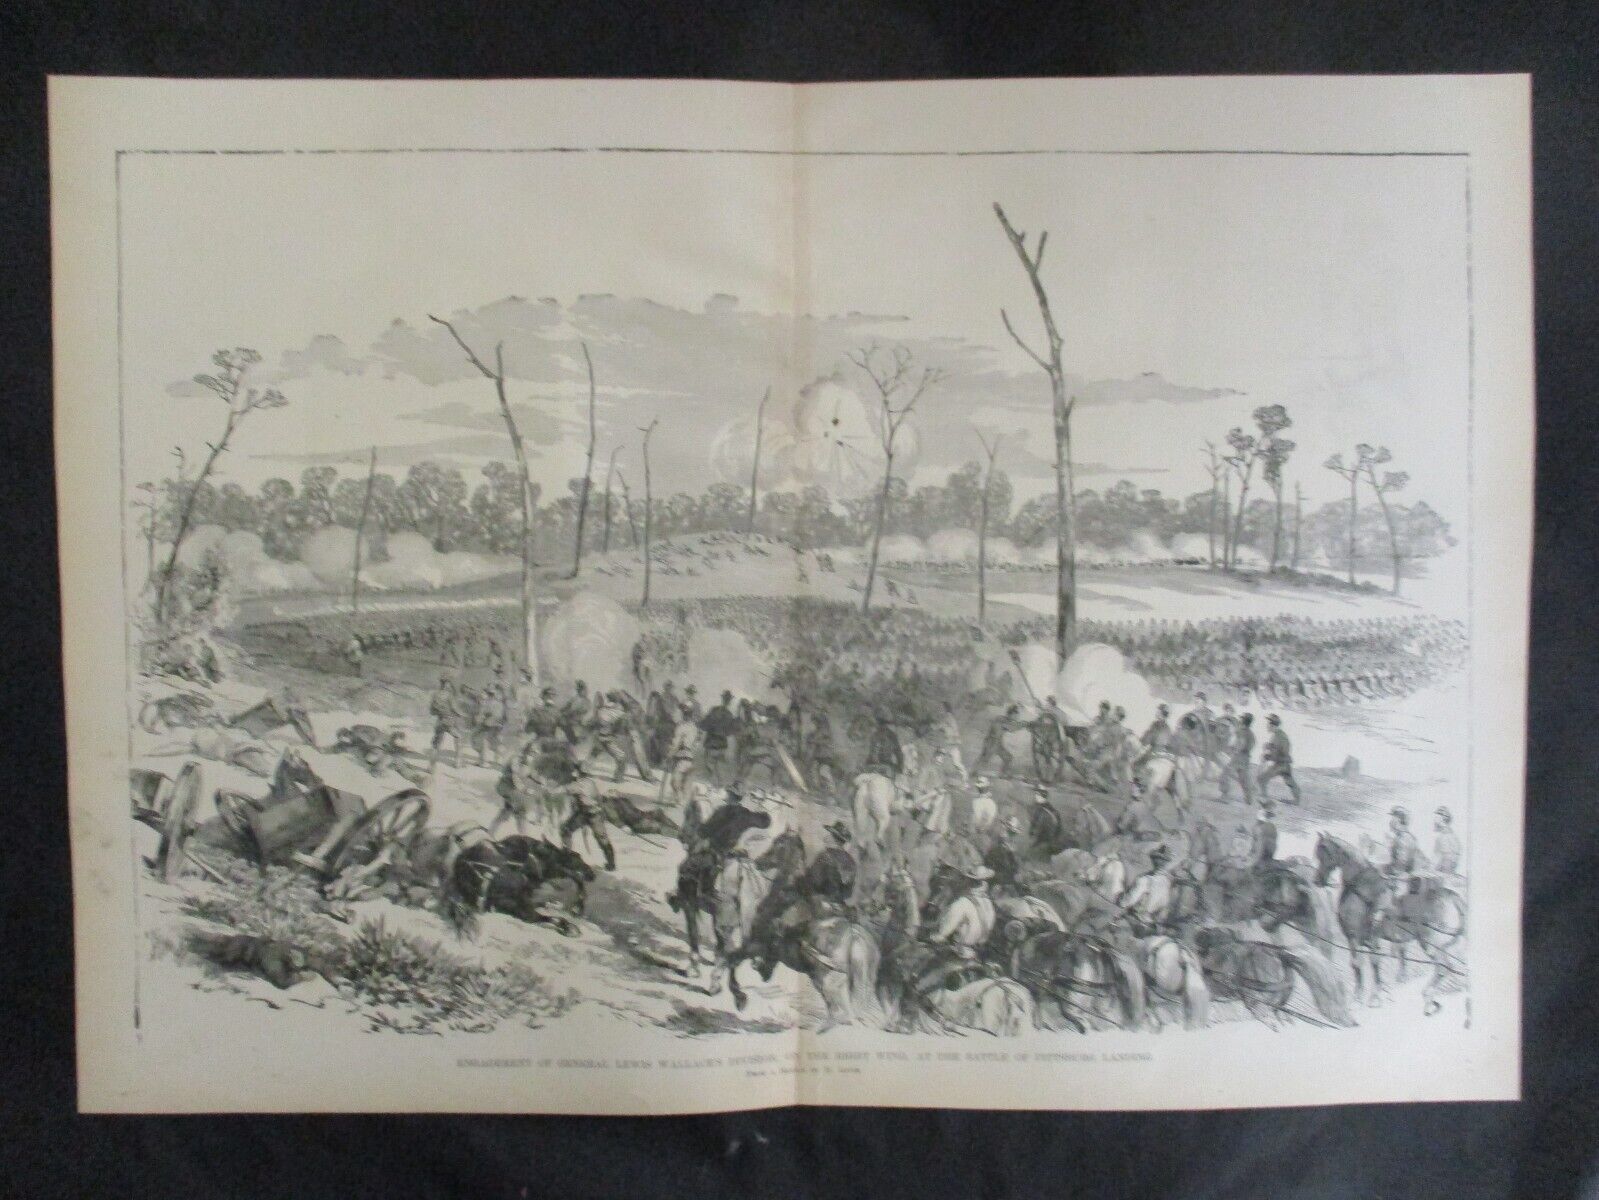 1885 Civil War Print - Battle of Shiloh, Tennessee, 1862, Wallace\'s Right Wing